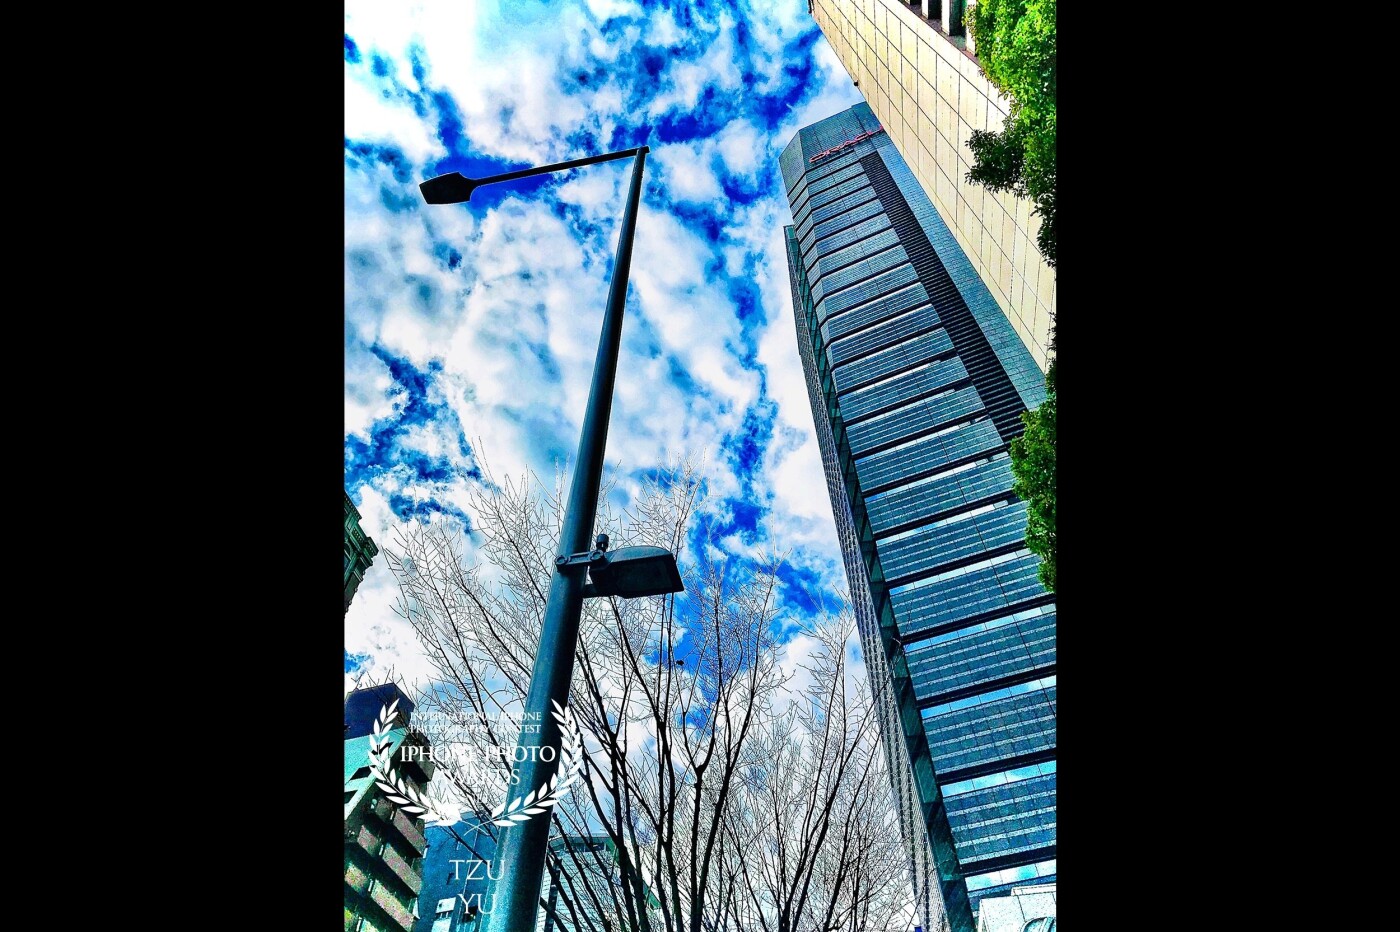 This photograph was taken on a street in Japan, overlooking the blue sky and white clouds. It feels imposing and imposing. The building reflects the white clouds, making it more dazzling and charming